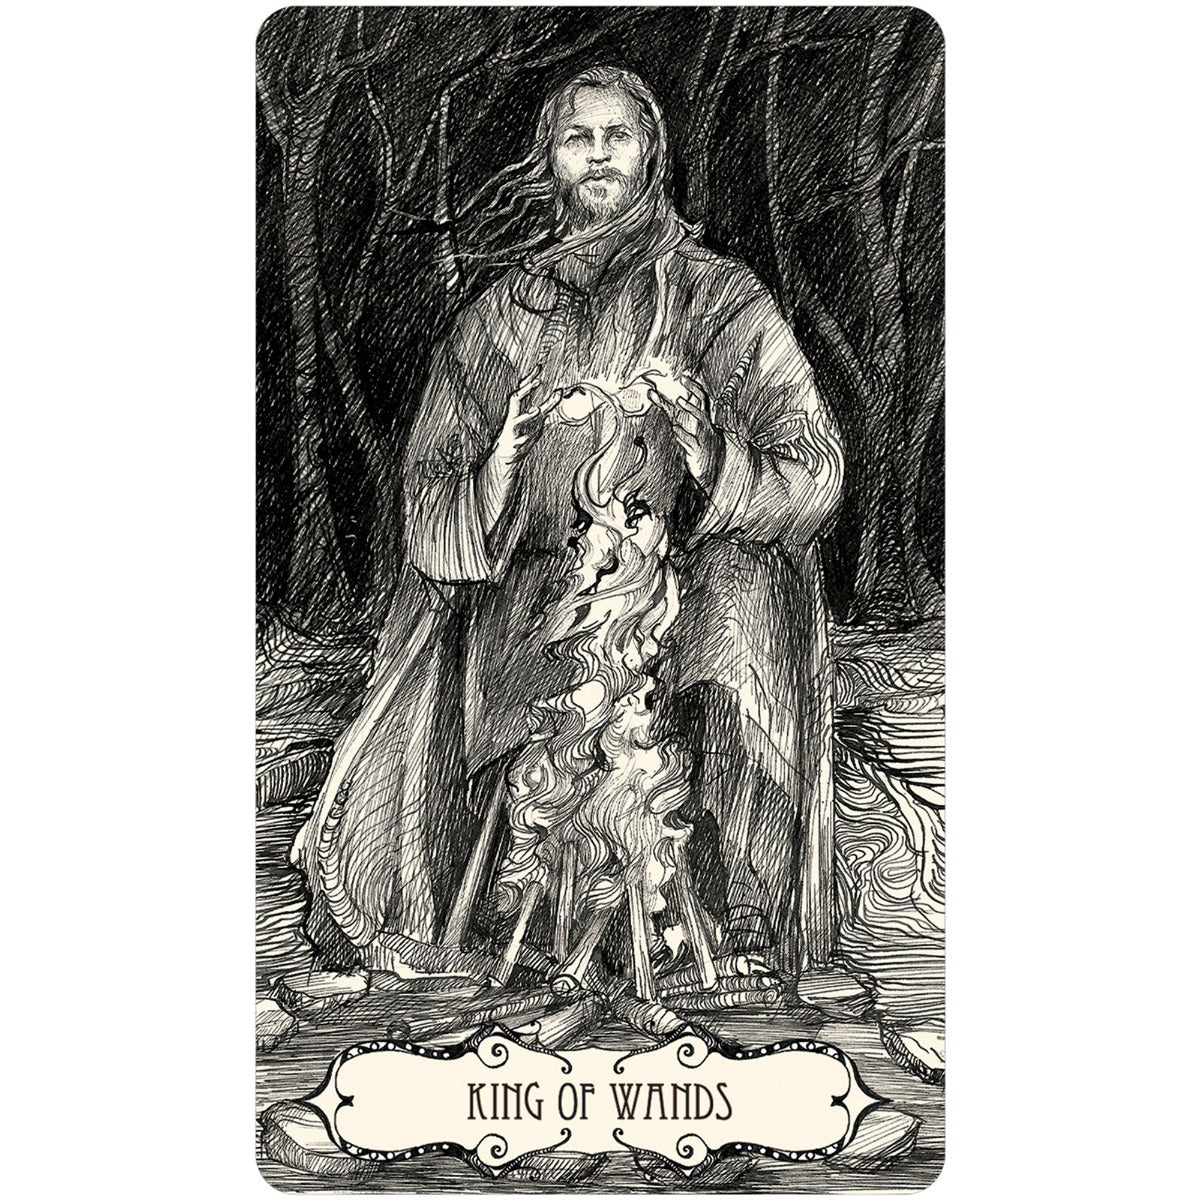 Tarot of the Abyss - 13 Moons